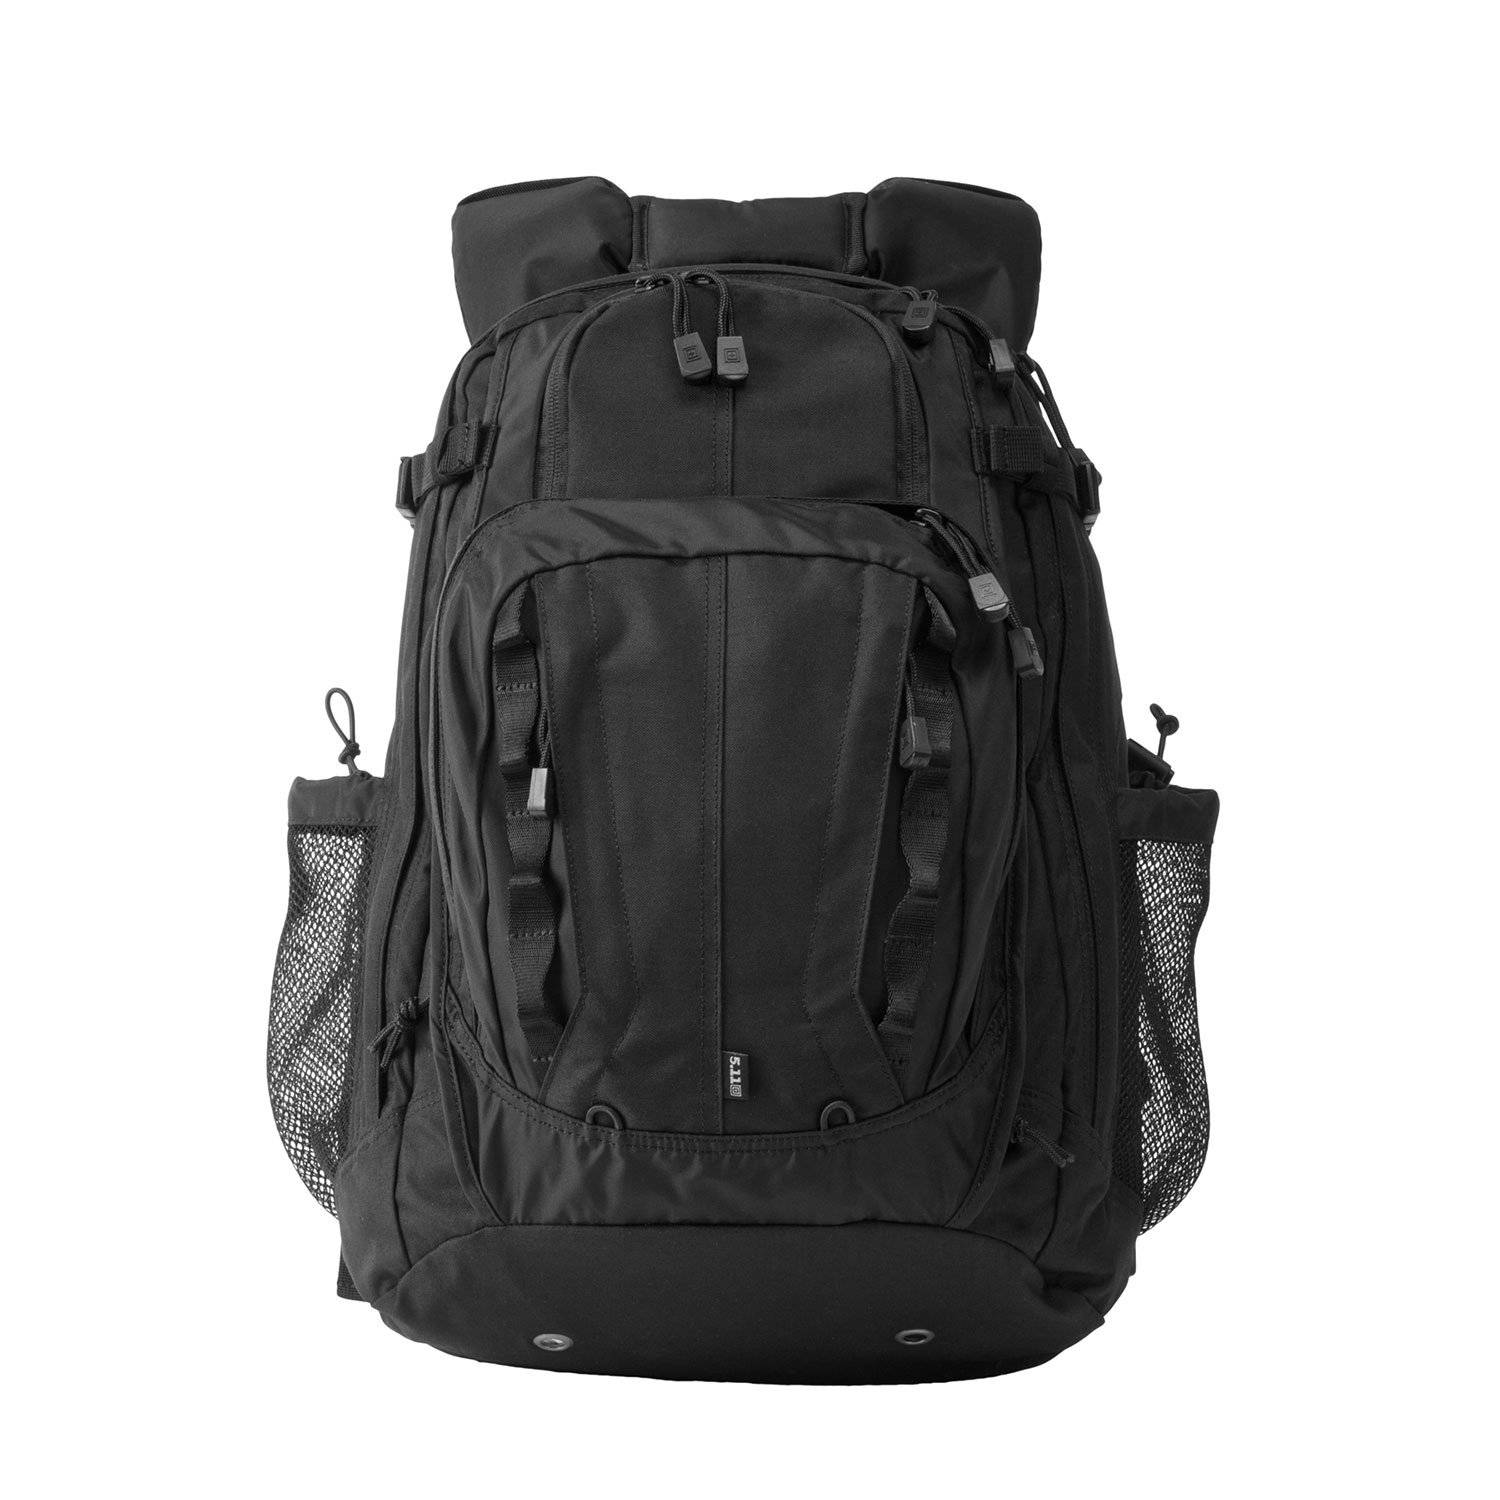 5.11 Tactical Covrt 18 Tactical Backpack